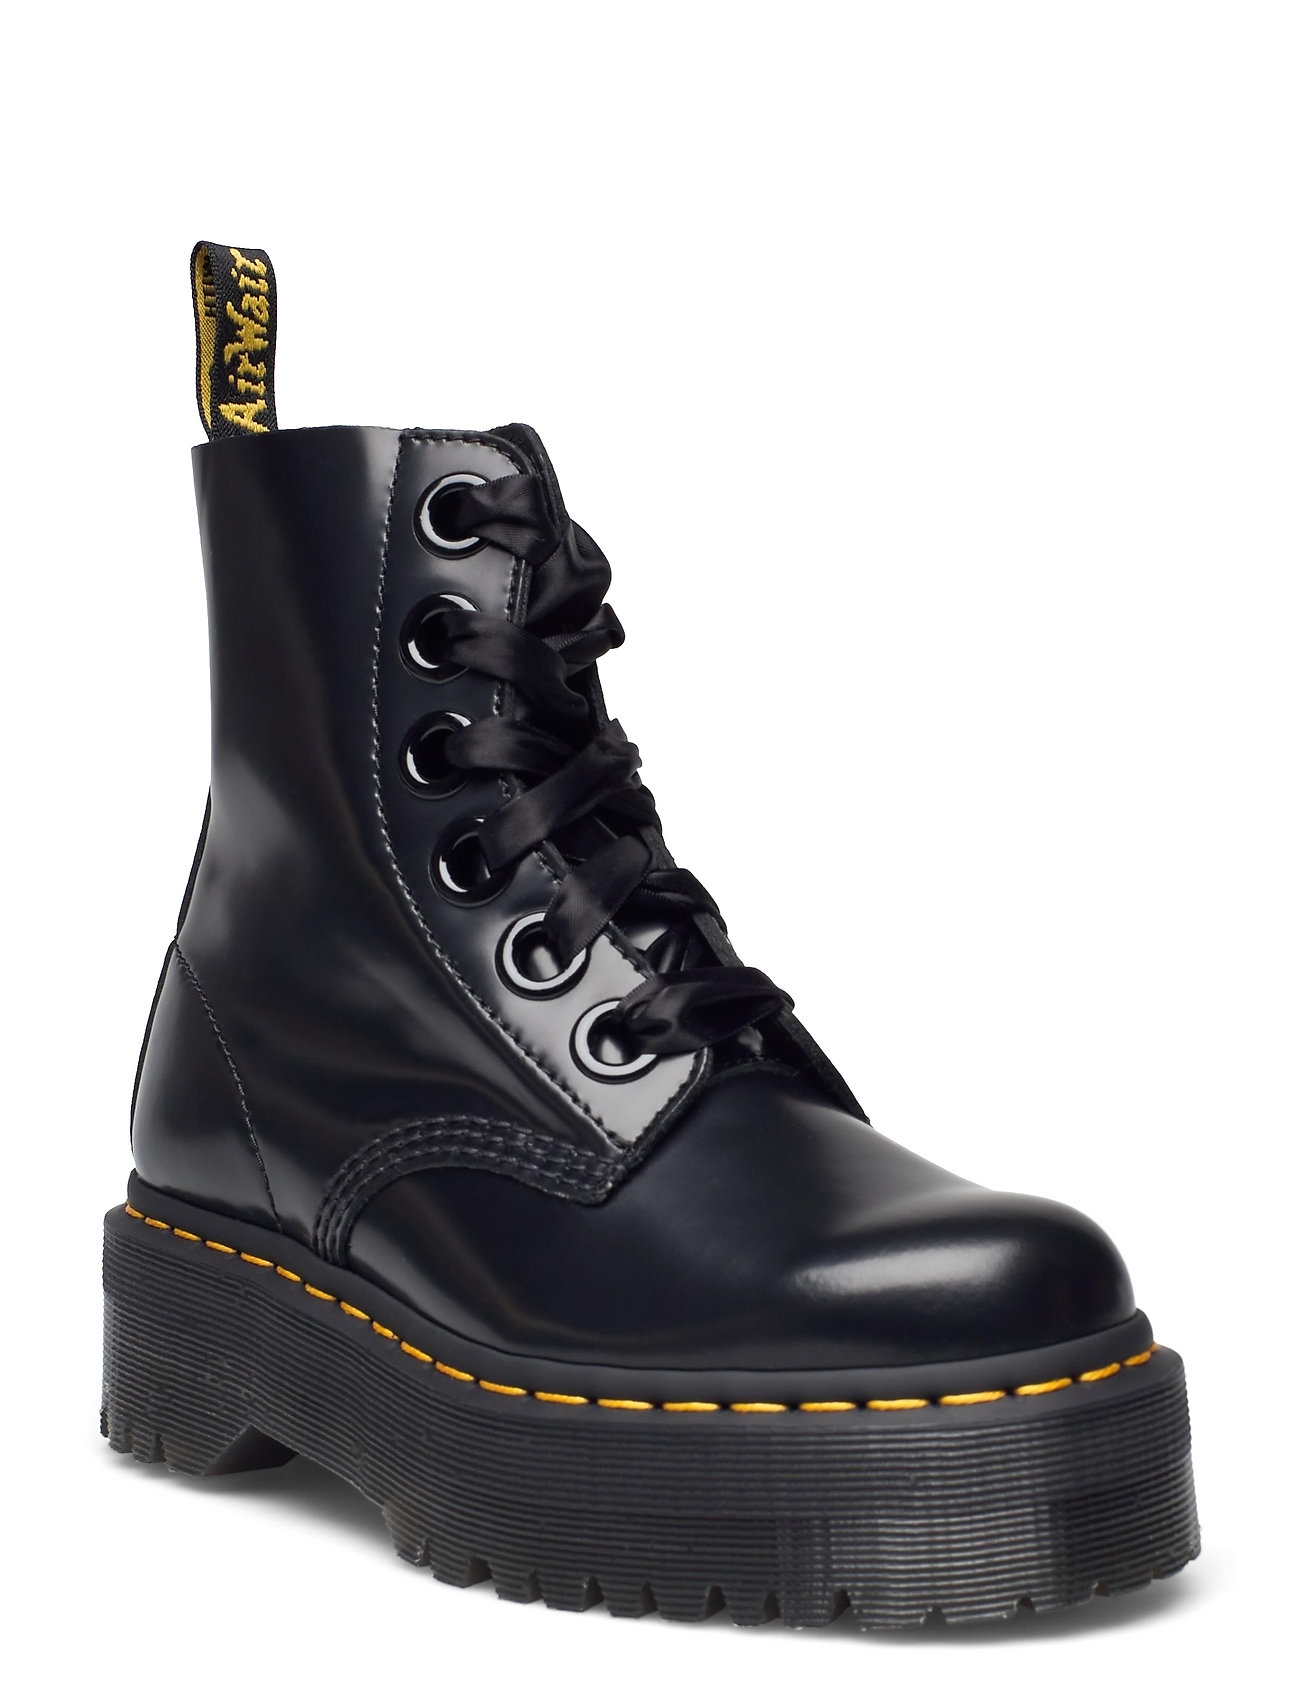 Molly Black Buttero Shoes Boots Ankle Boots Ankle Boot - Flat Musta Dr. Martens